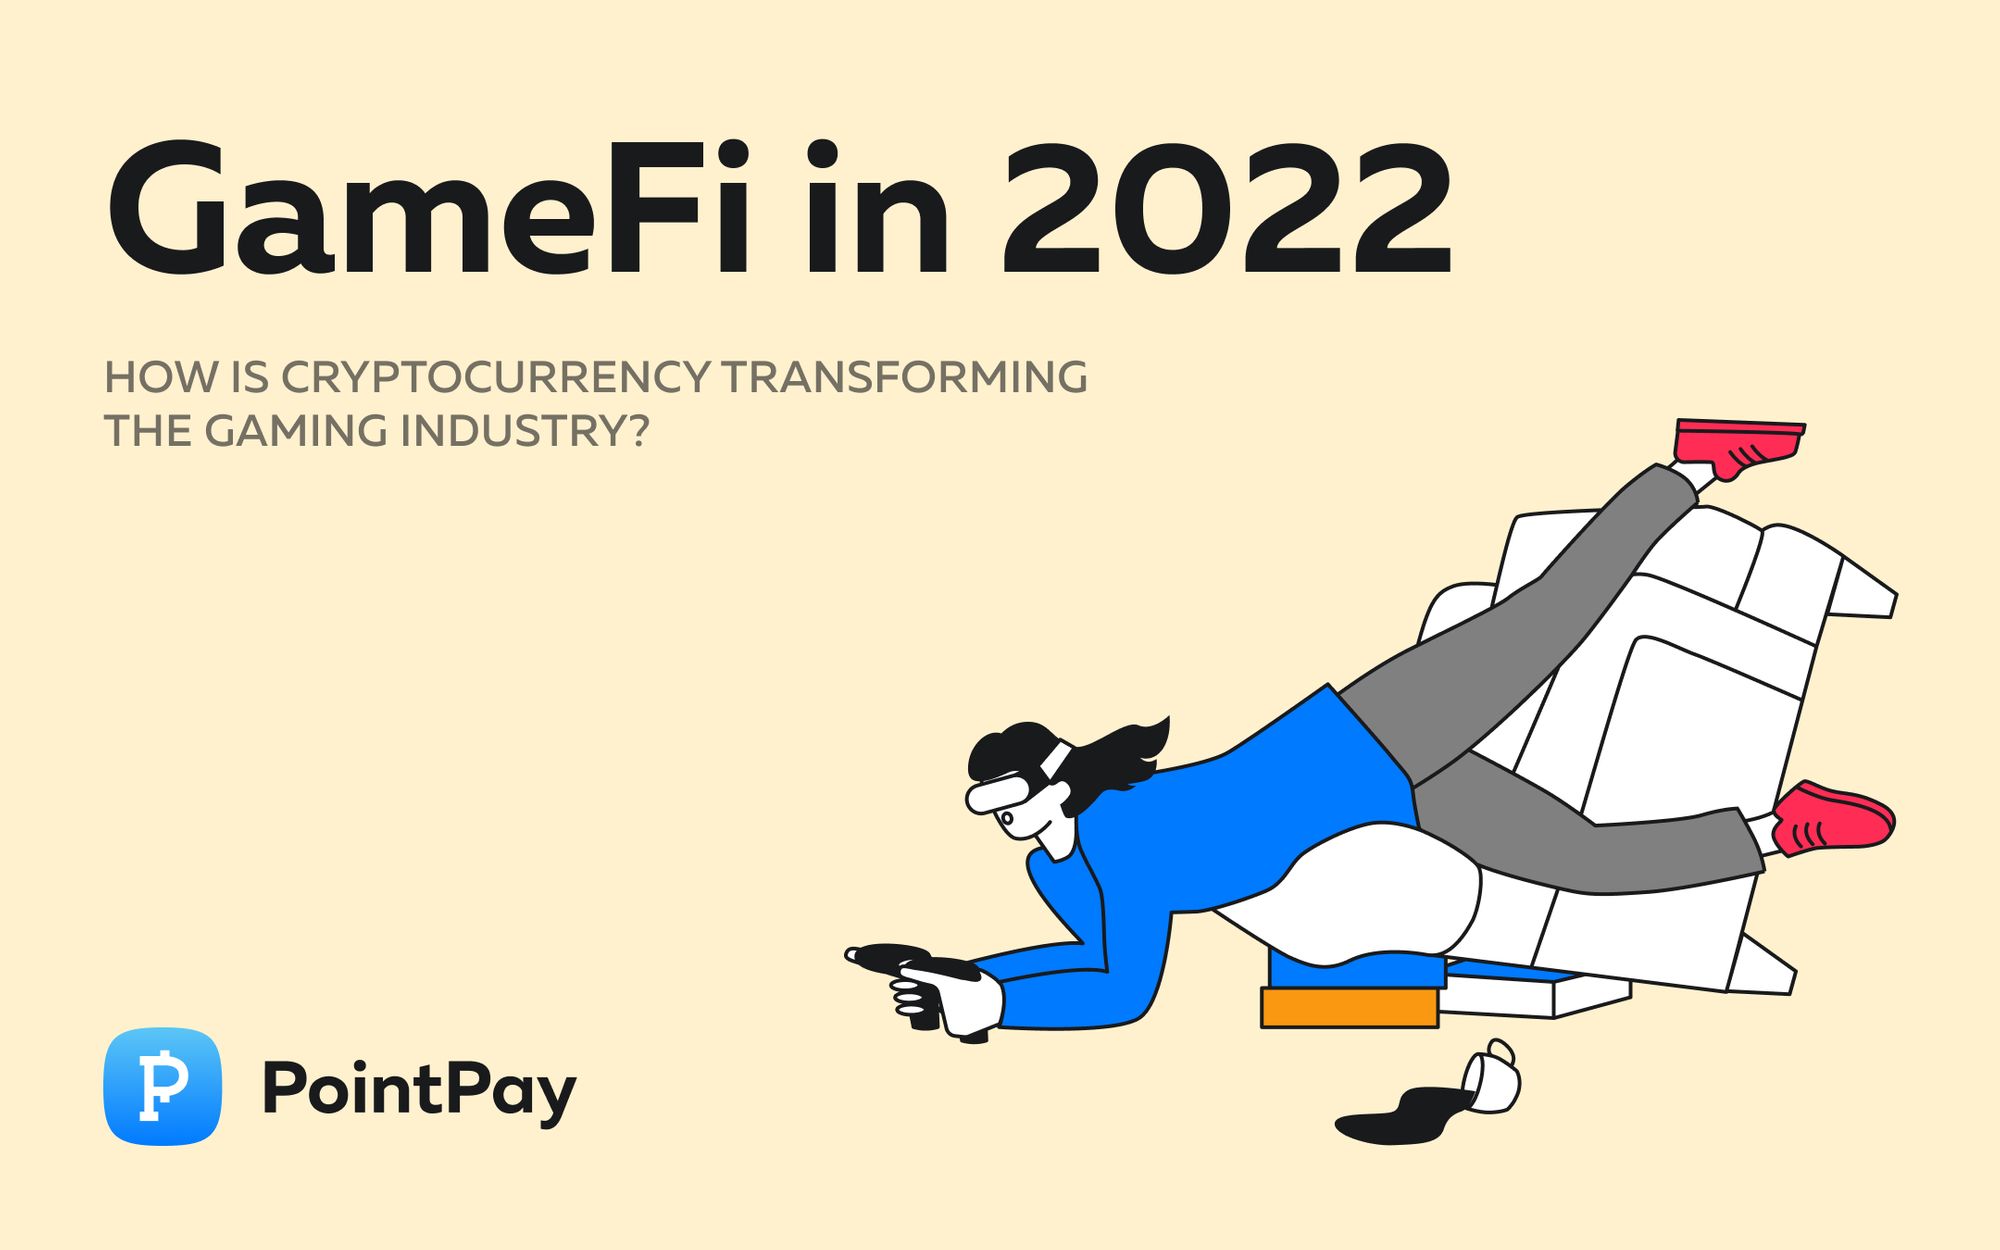 GameFi in 2022. How Is Cryptocurrency Transforming the Gaming Industry?